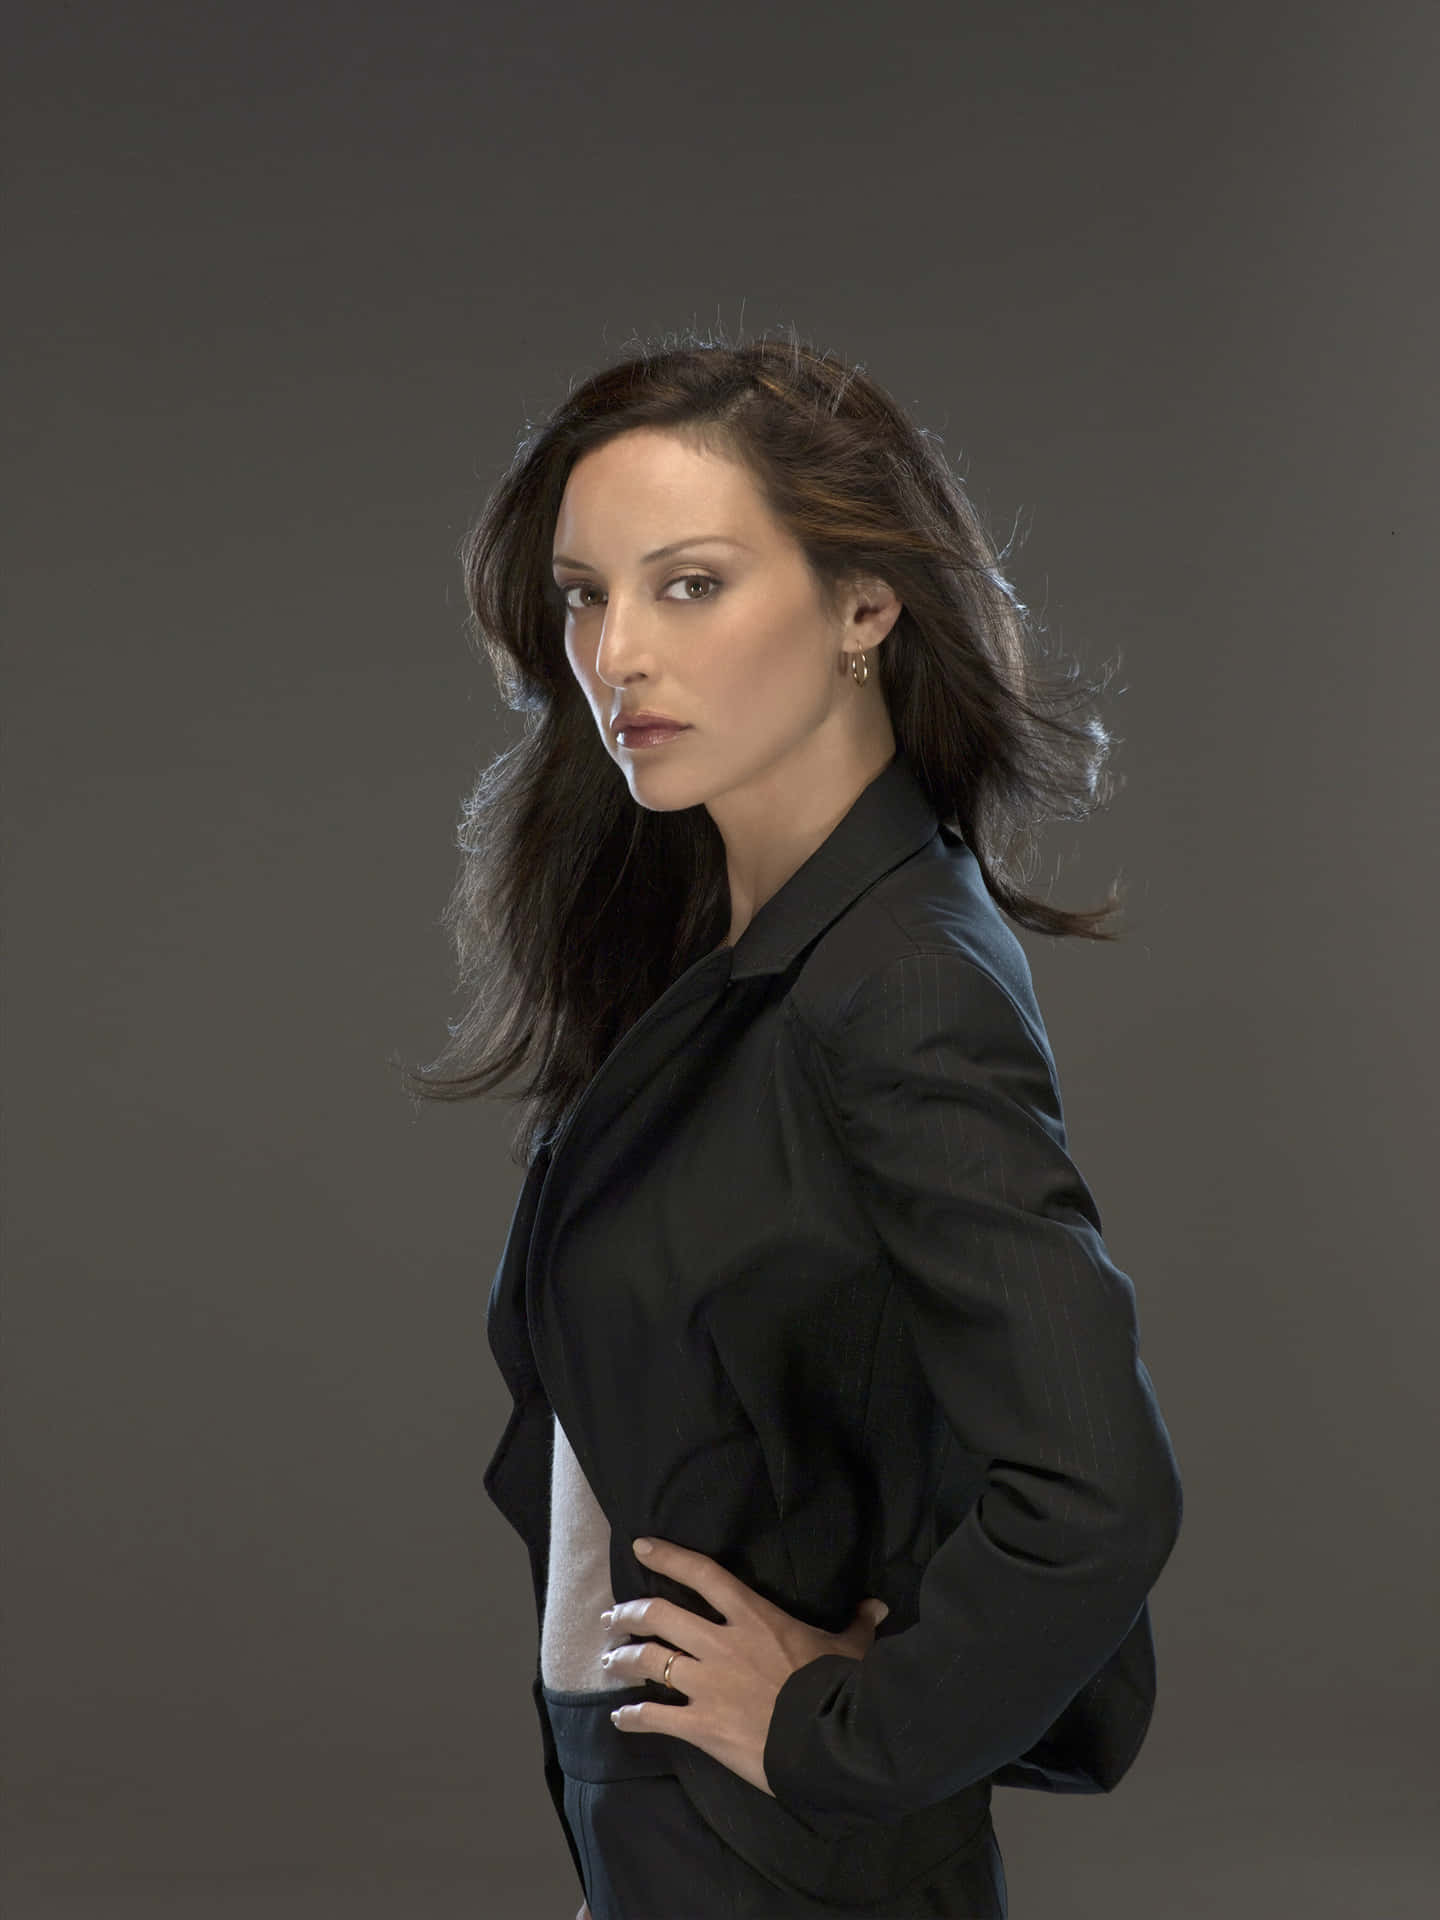 Paget Brewster Posing For A Portrait